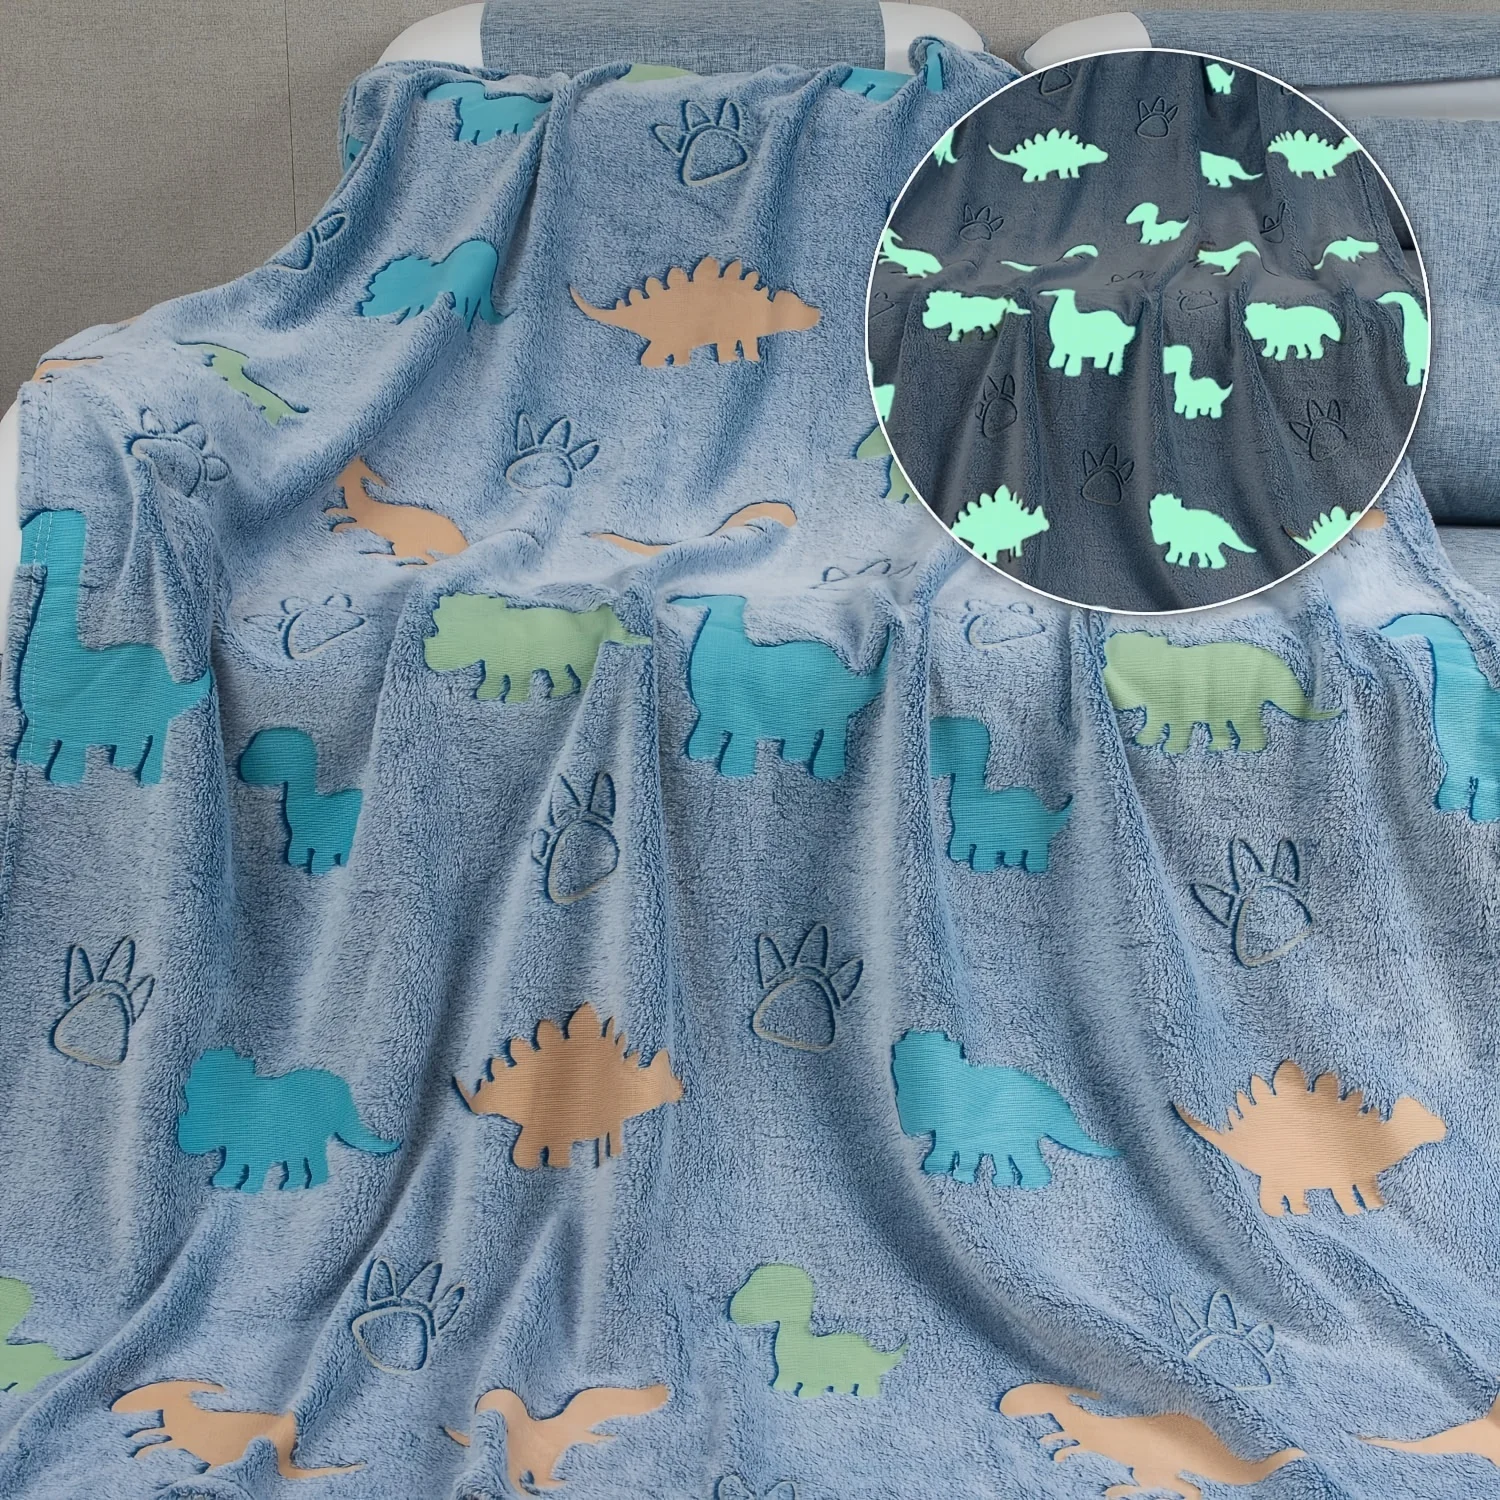 Ark dinosaur throw blanket dinosaur flannel glowing blanket for bed sofa couch birthday thumb200